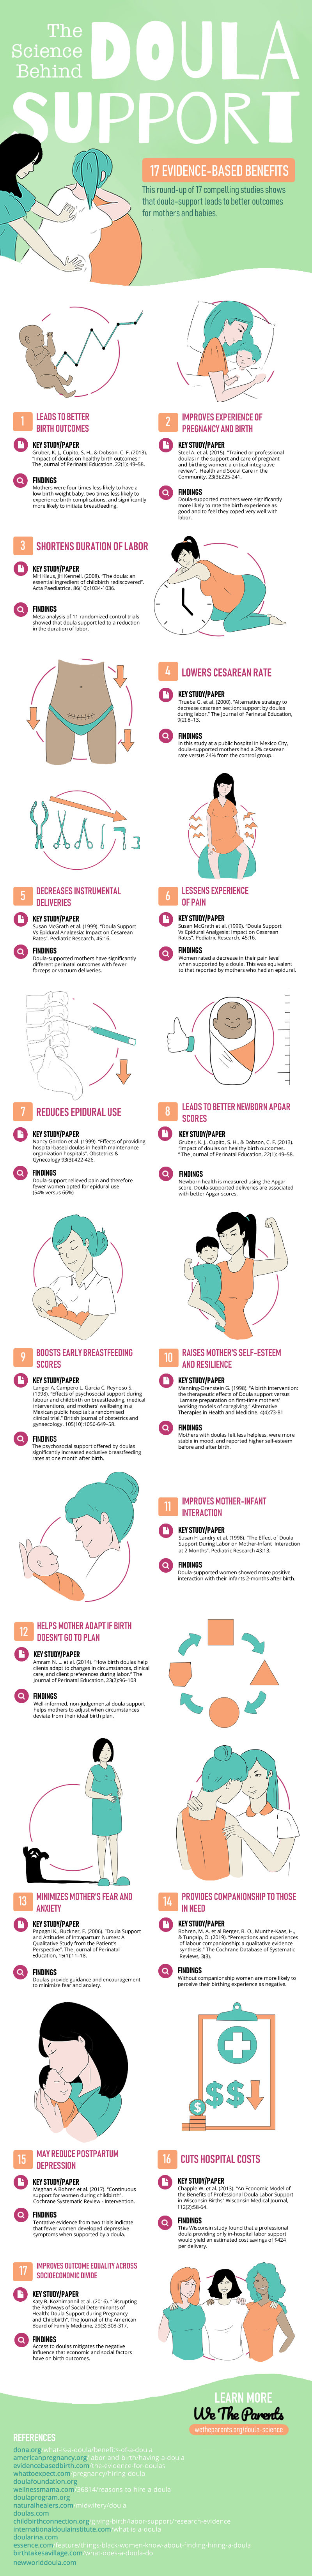 Doula-science-INFOGRAPHIC